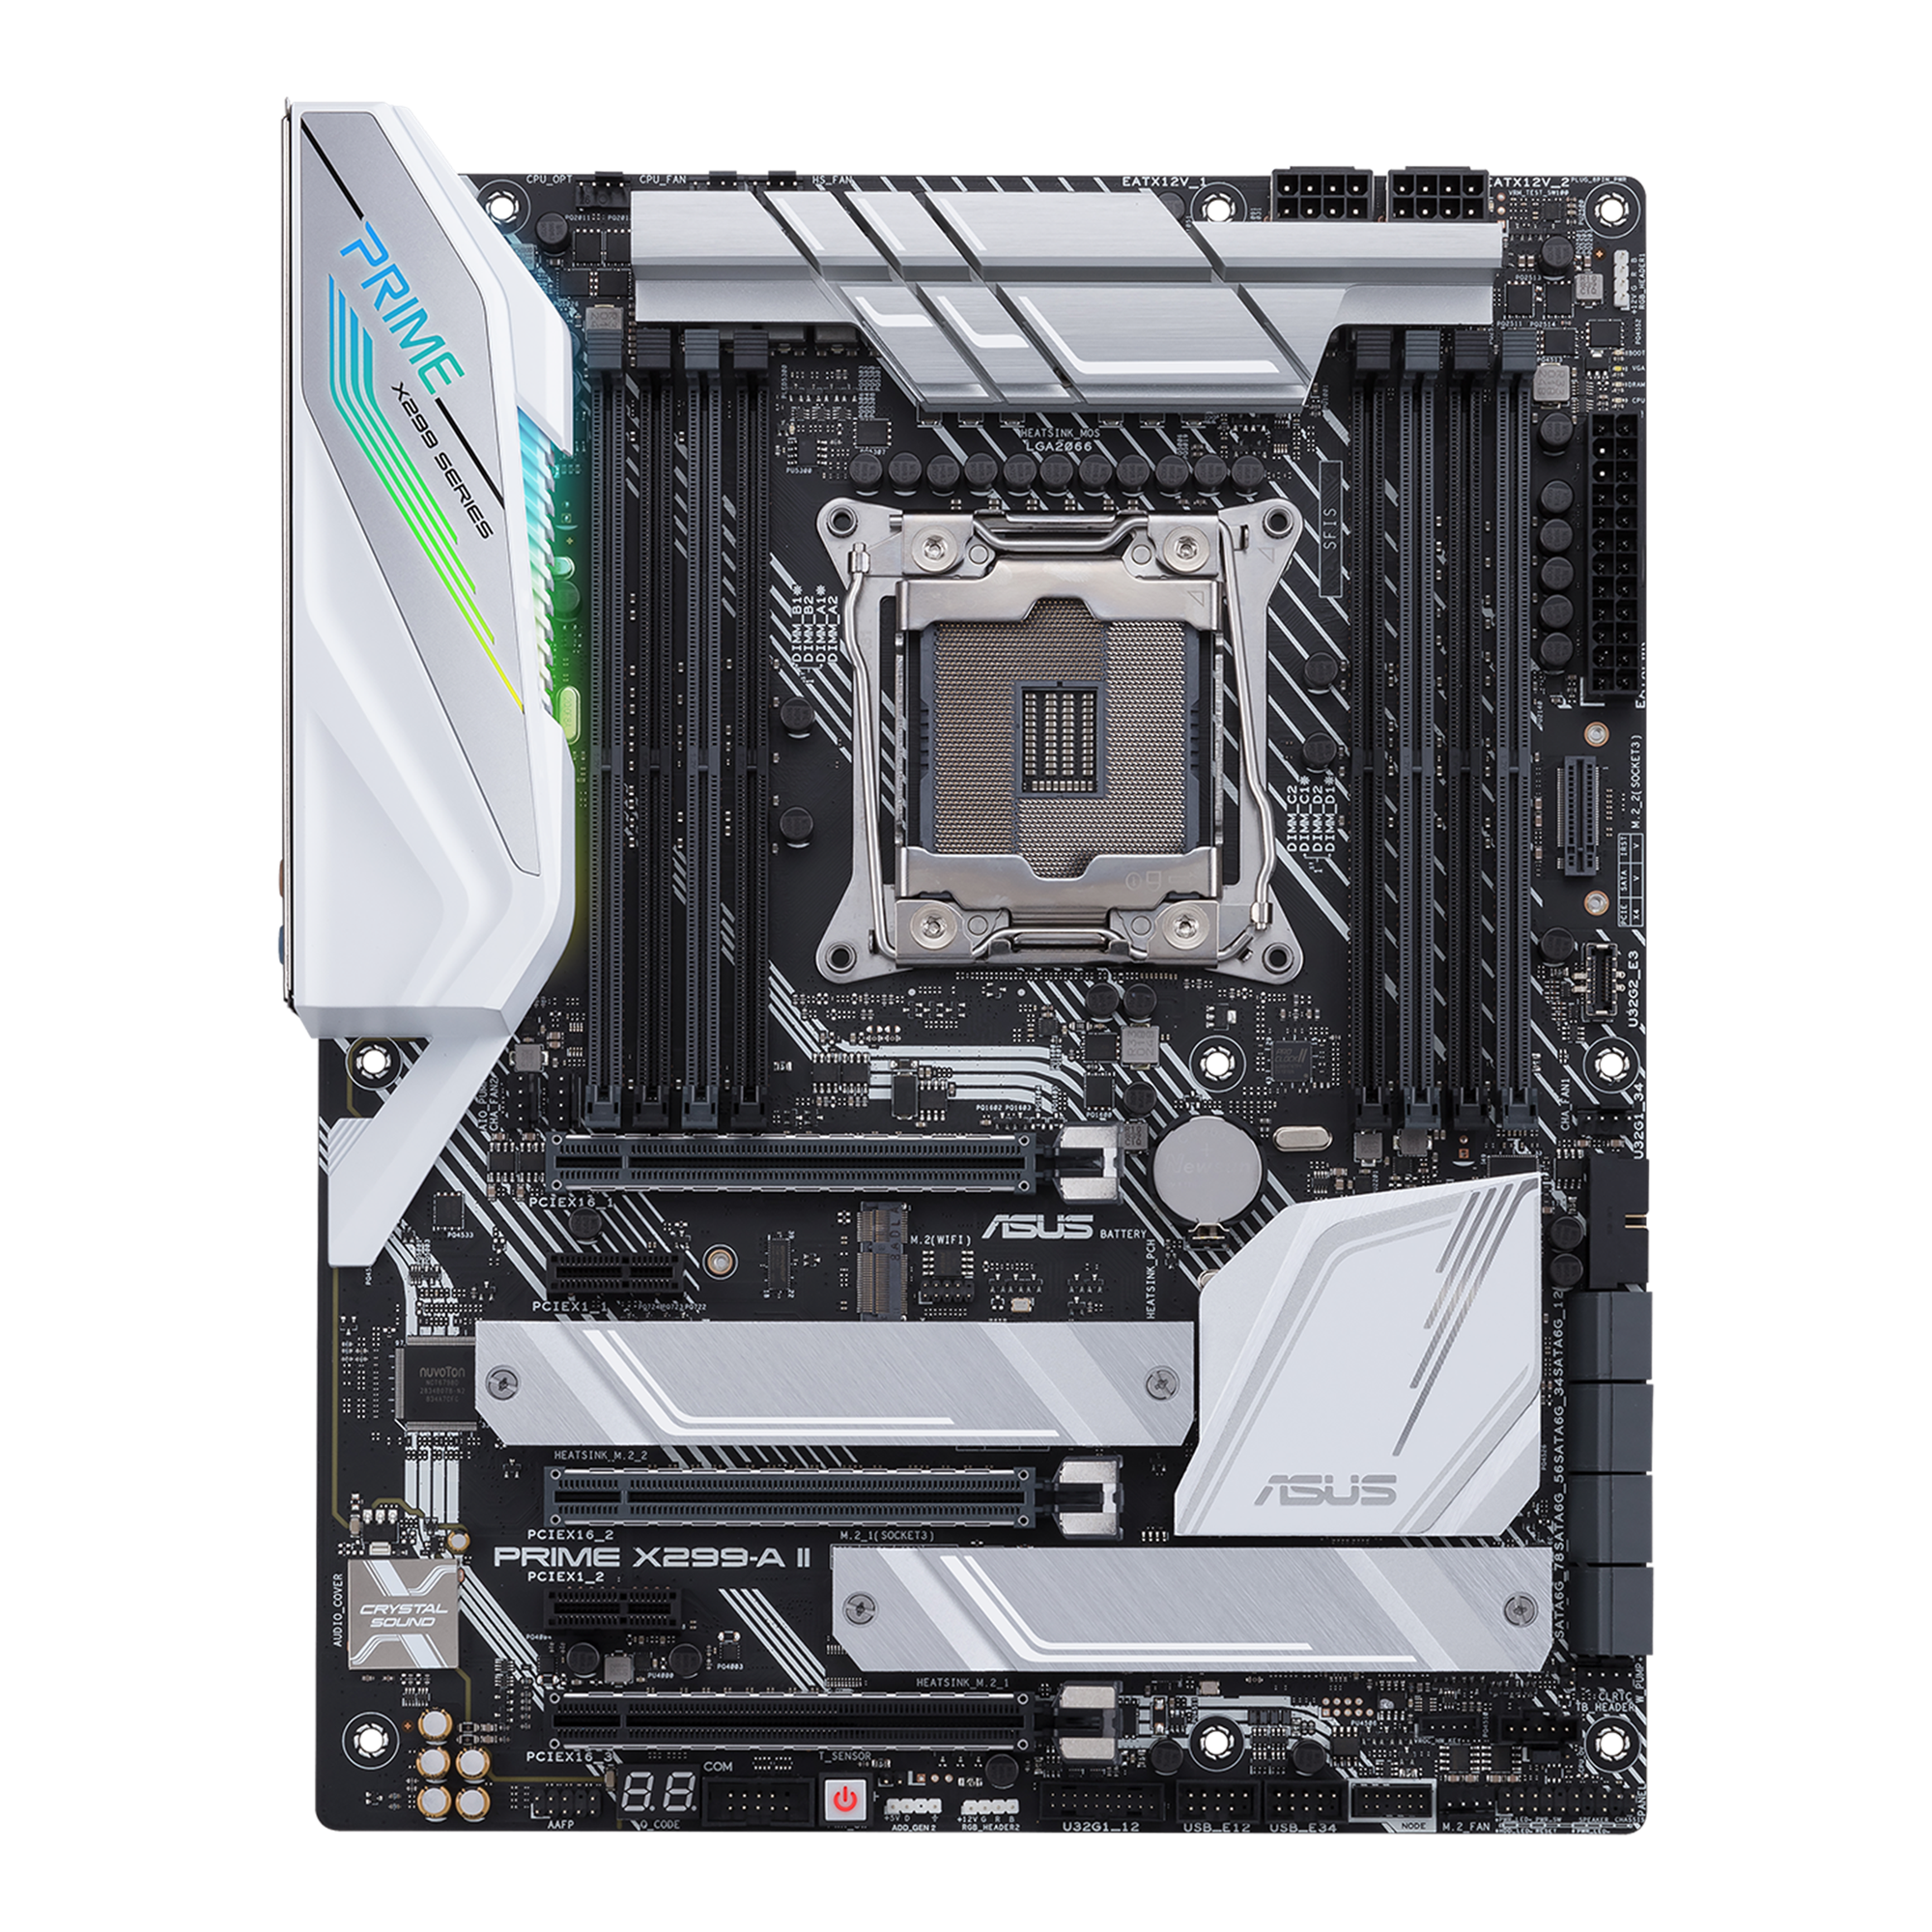 Prime X299-A II｜Motherboards｜ASUS USA